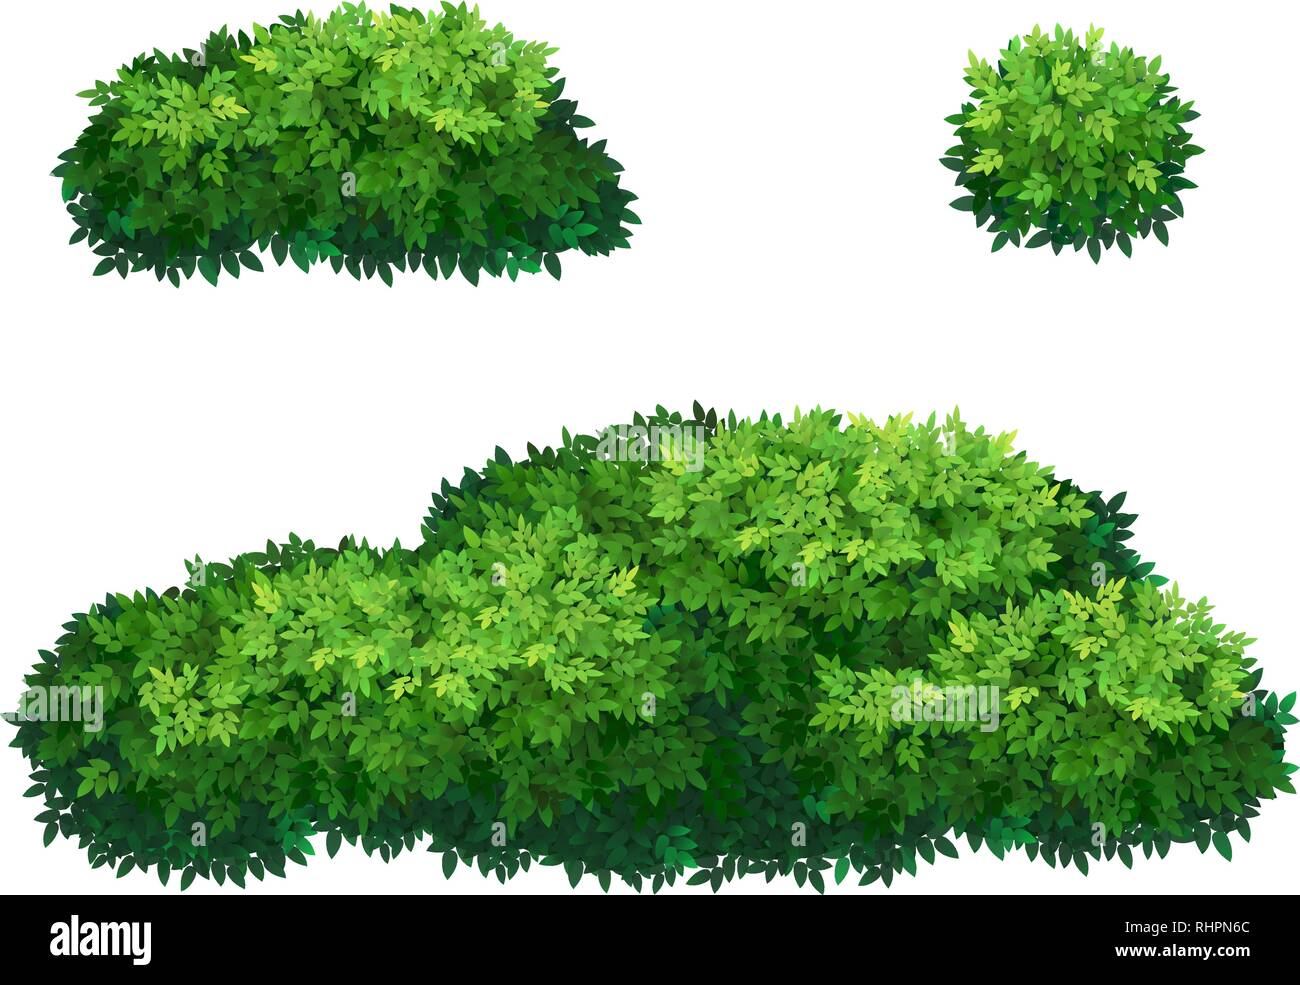 Green bushes and tree crown. Stock Vector